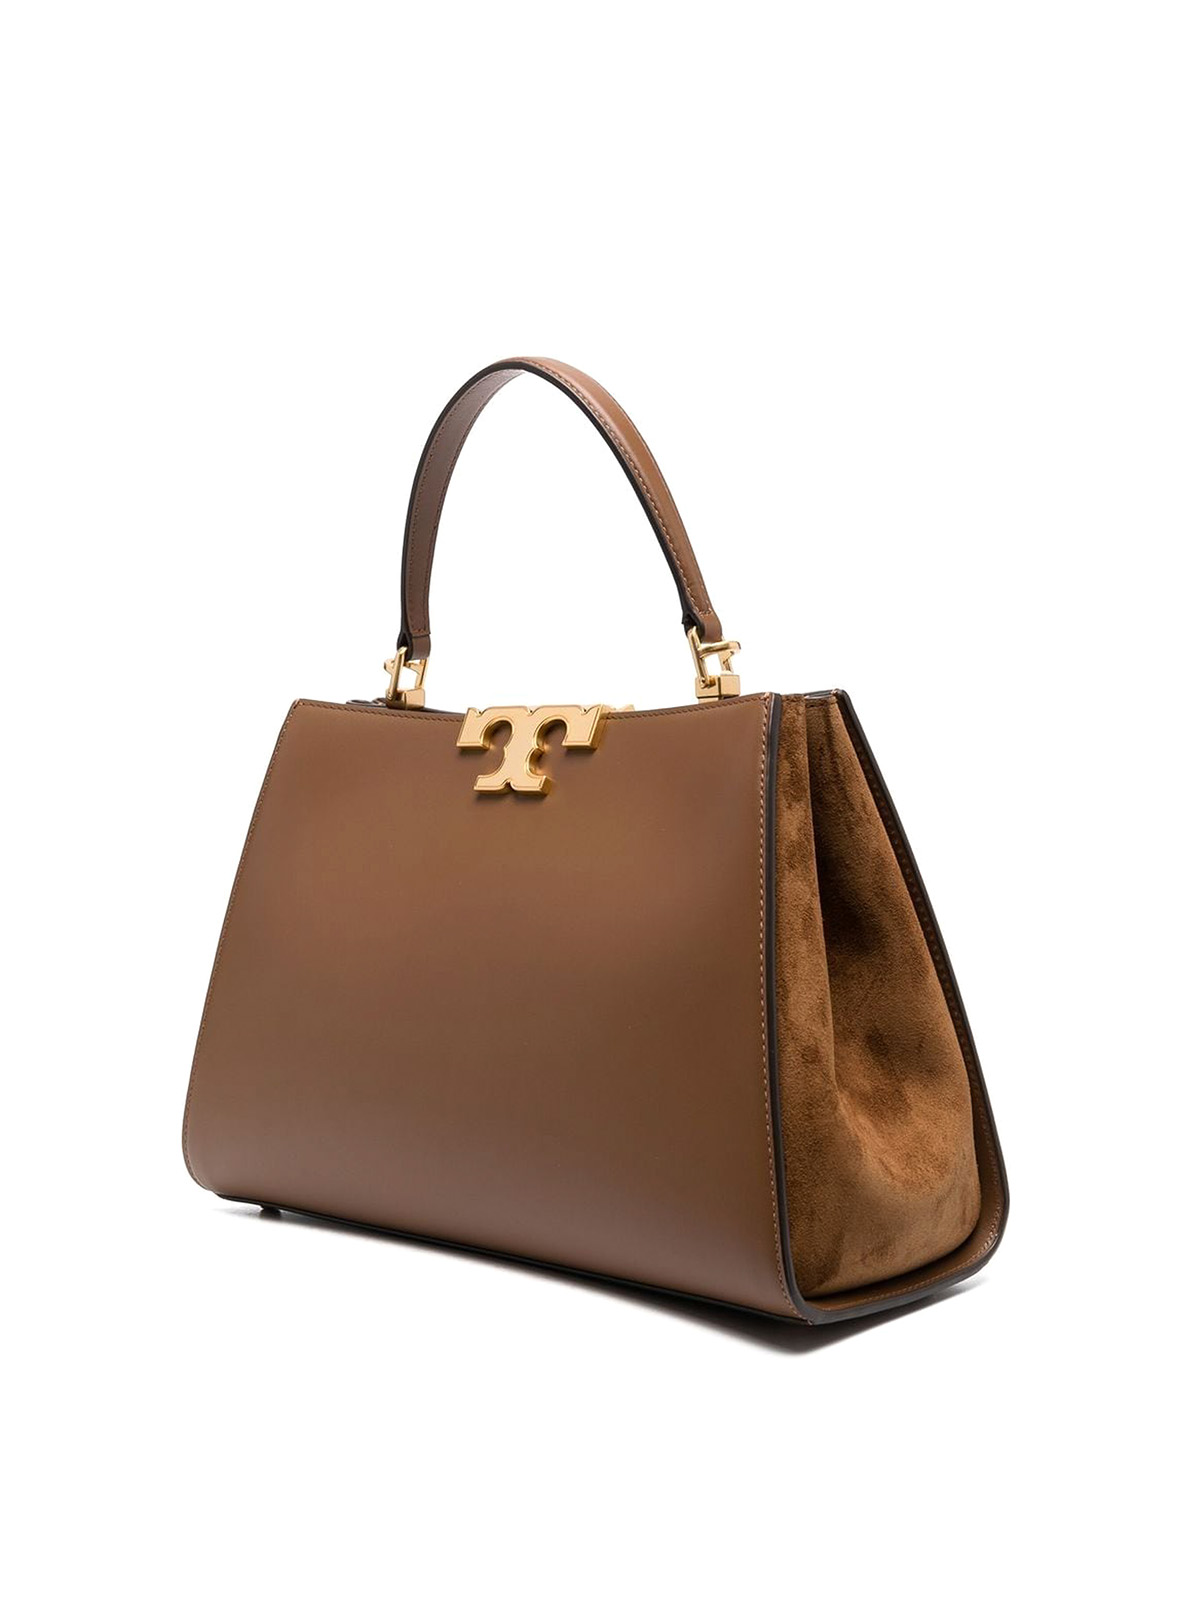 Thoughts on the Tory Burch Eleanor Satchel? : r/handbags